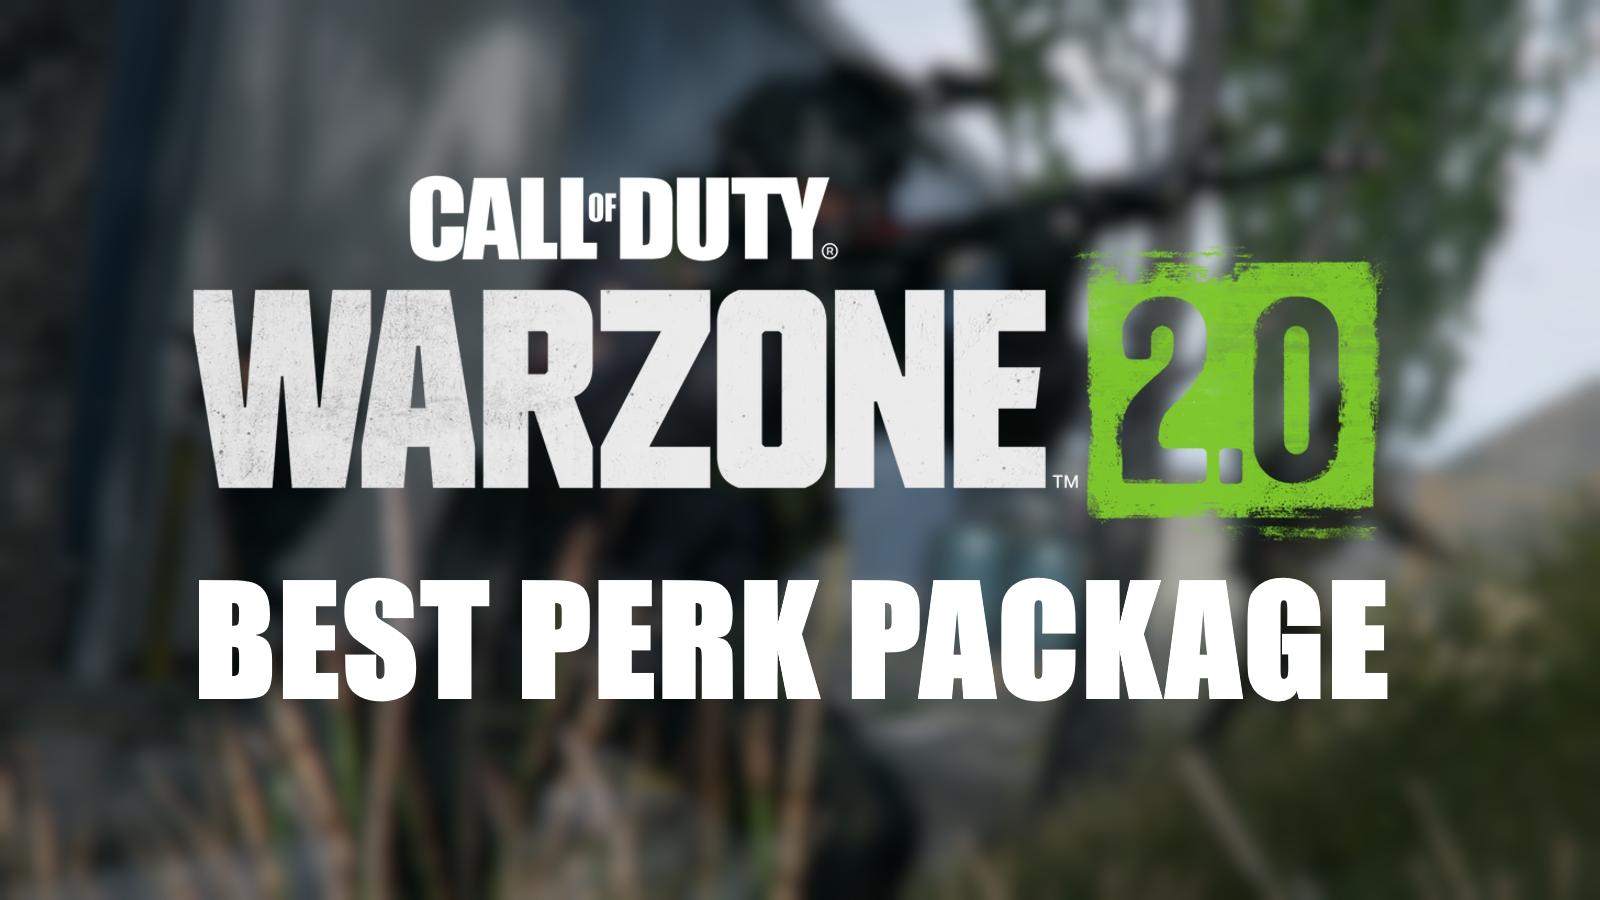 thumbnail image of warzone 2 logo and best perk package subtitle in front of blurred background of call of duty soldiers.